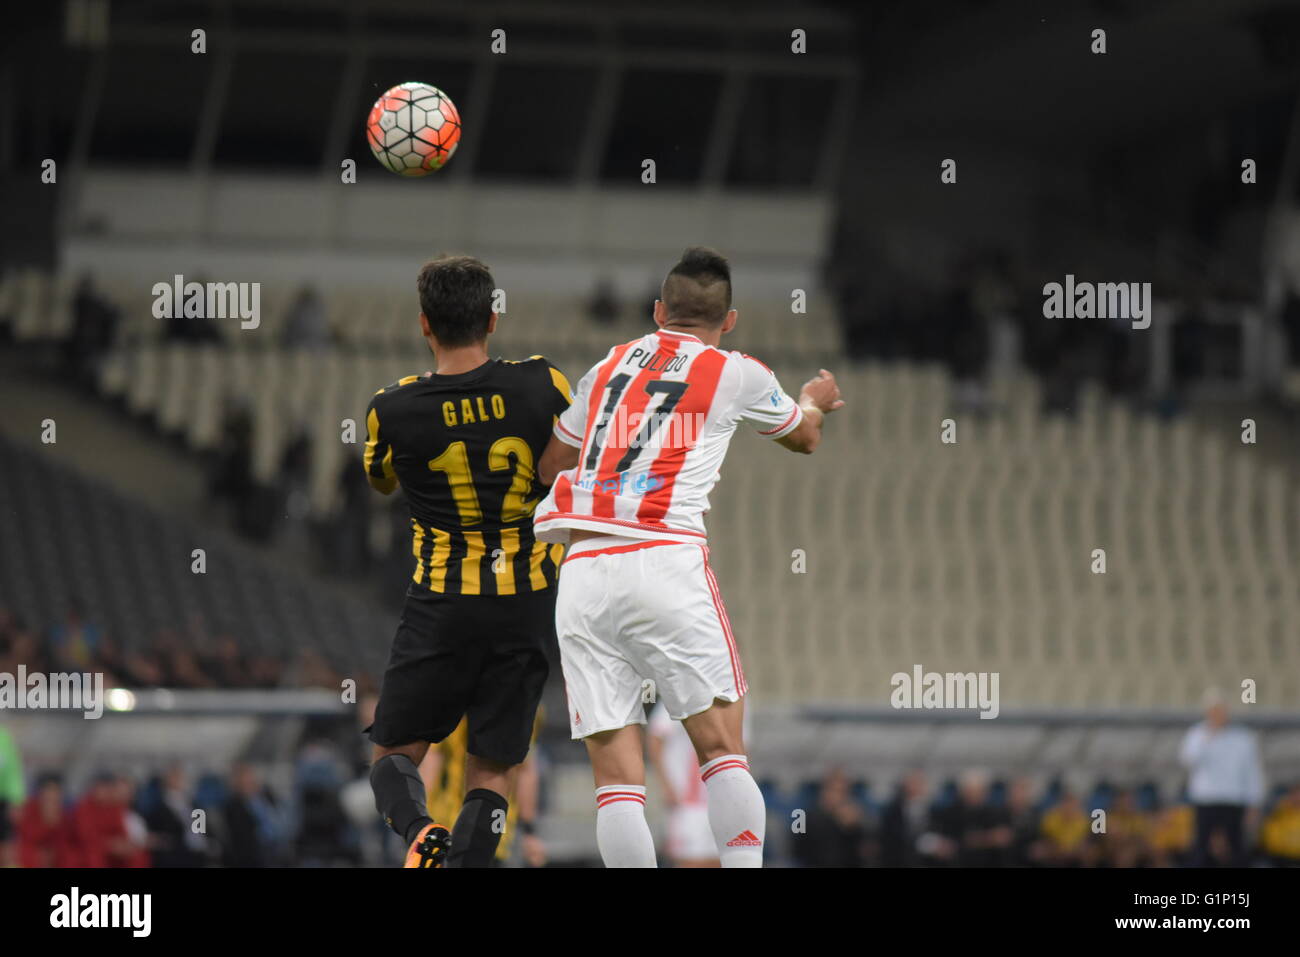 Rodrigo Galo of AEK (left) tries to win the ball from Alan Pulido of  Olympiacos (right) during Greek Football Cup Final. AEK beats Olympiacos,  2-1. (Photo by Dimitrios Karvountzis/Pacific Press Stock Photo -